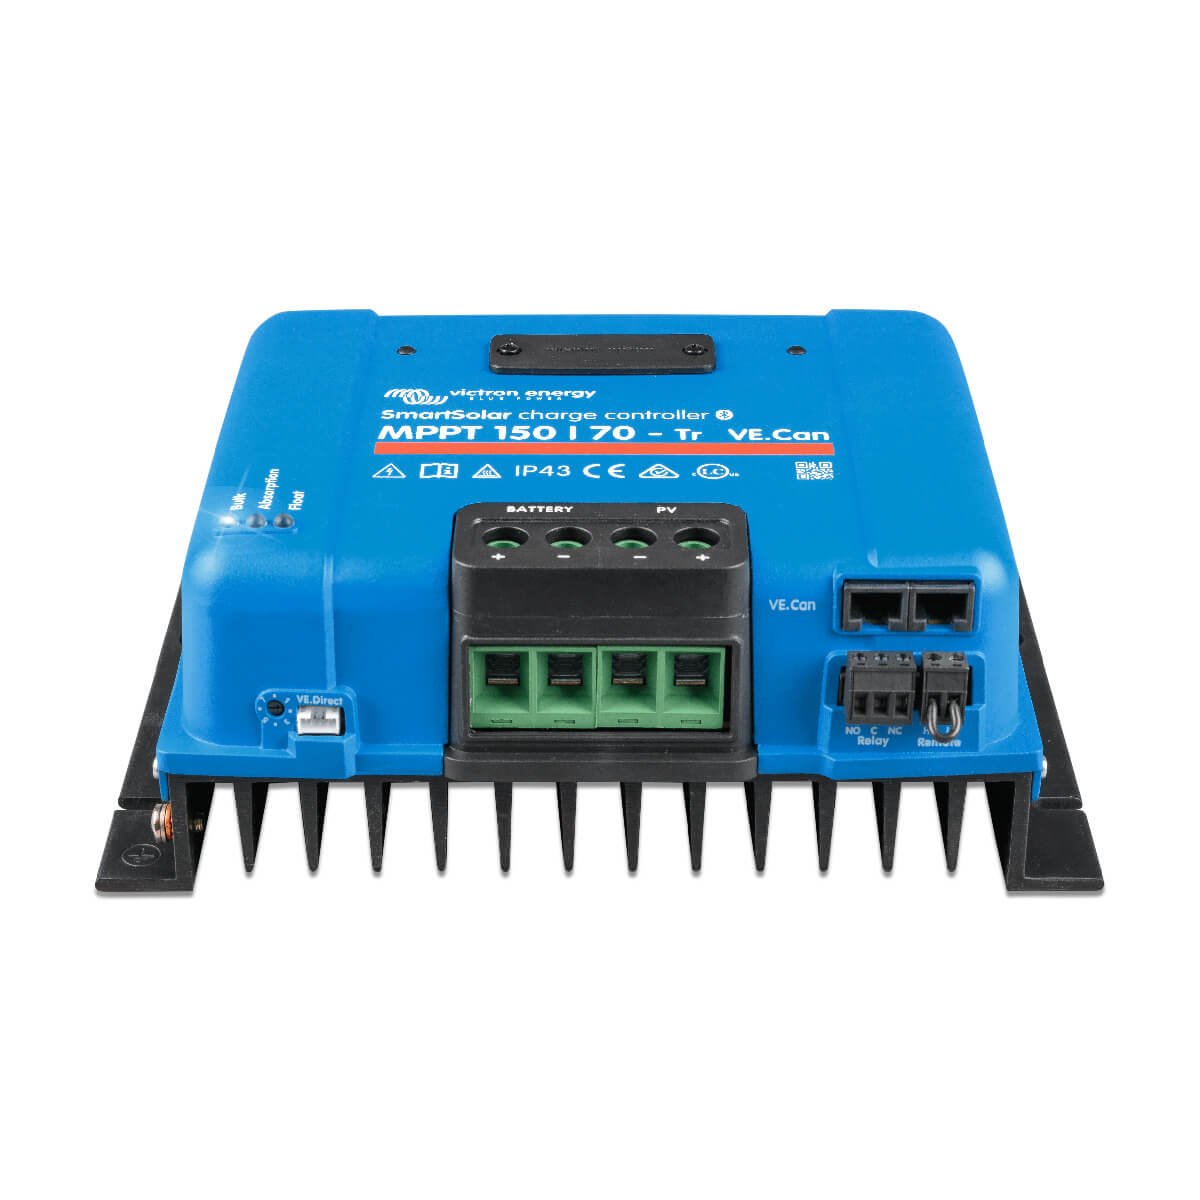 A blue Victron MPPT 150/70 - SmartSolar Charge Controller - Tr VE.Can with connectors and labels, set on a white background.